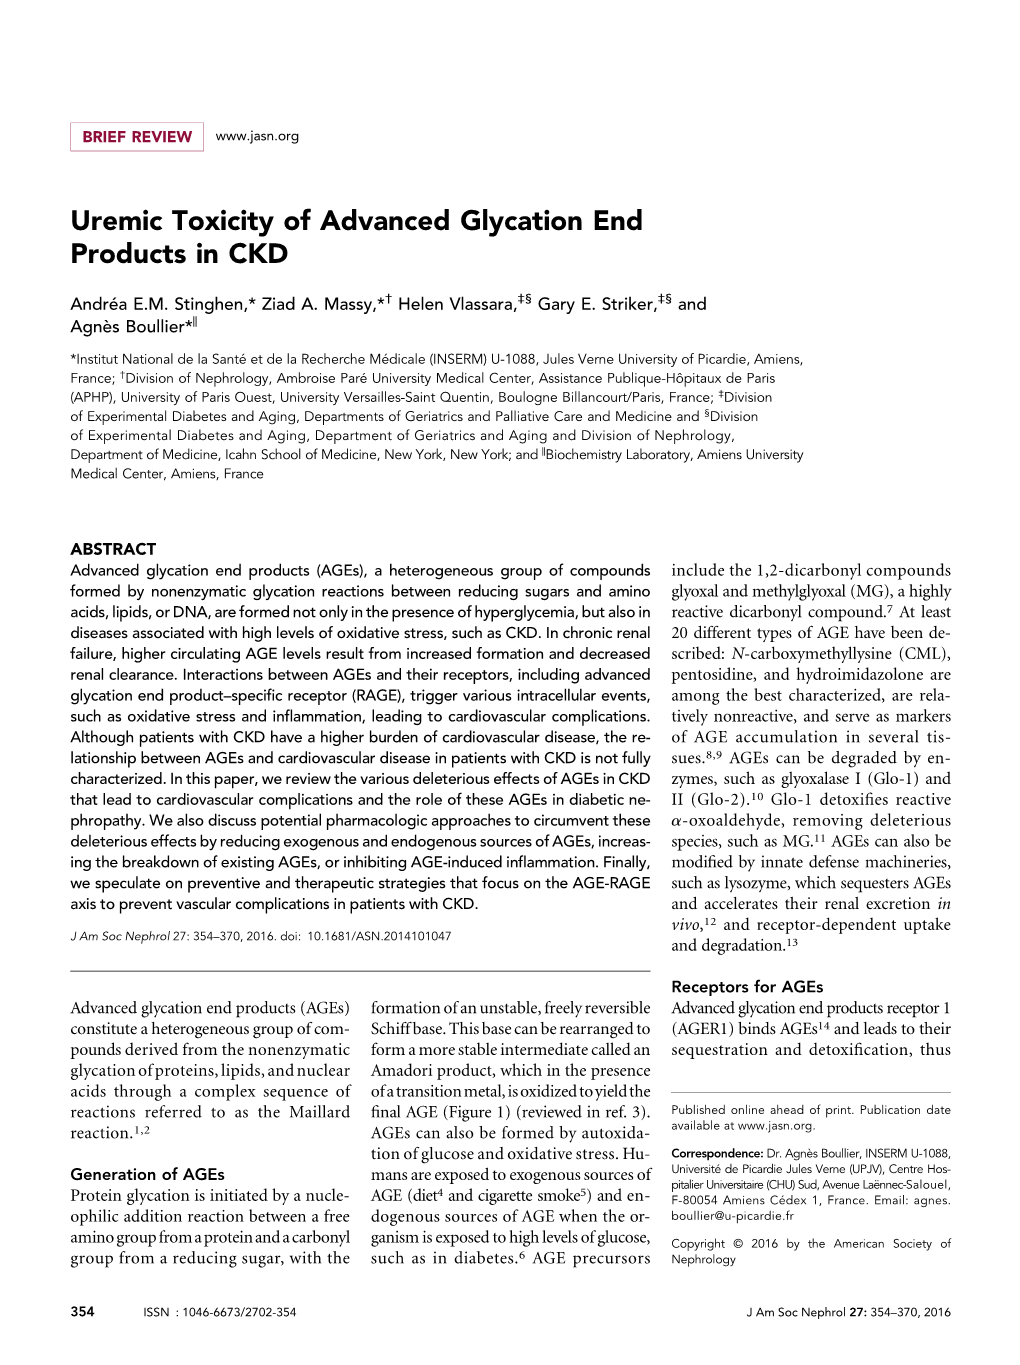 Uremic Toxicity of Advanced Glycation End Products in CKD